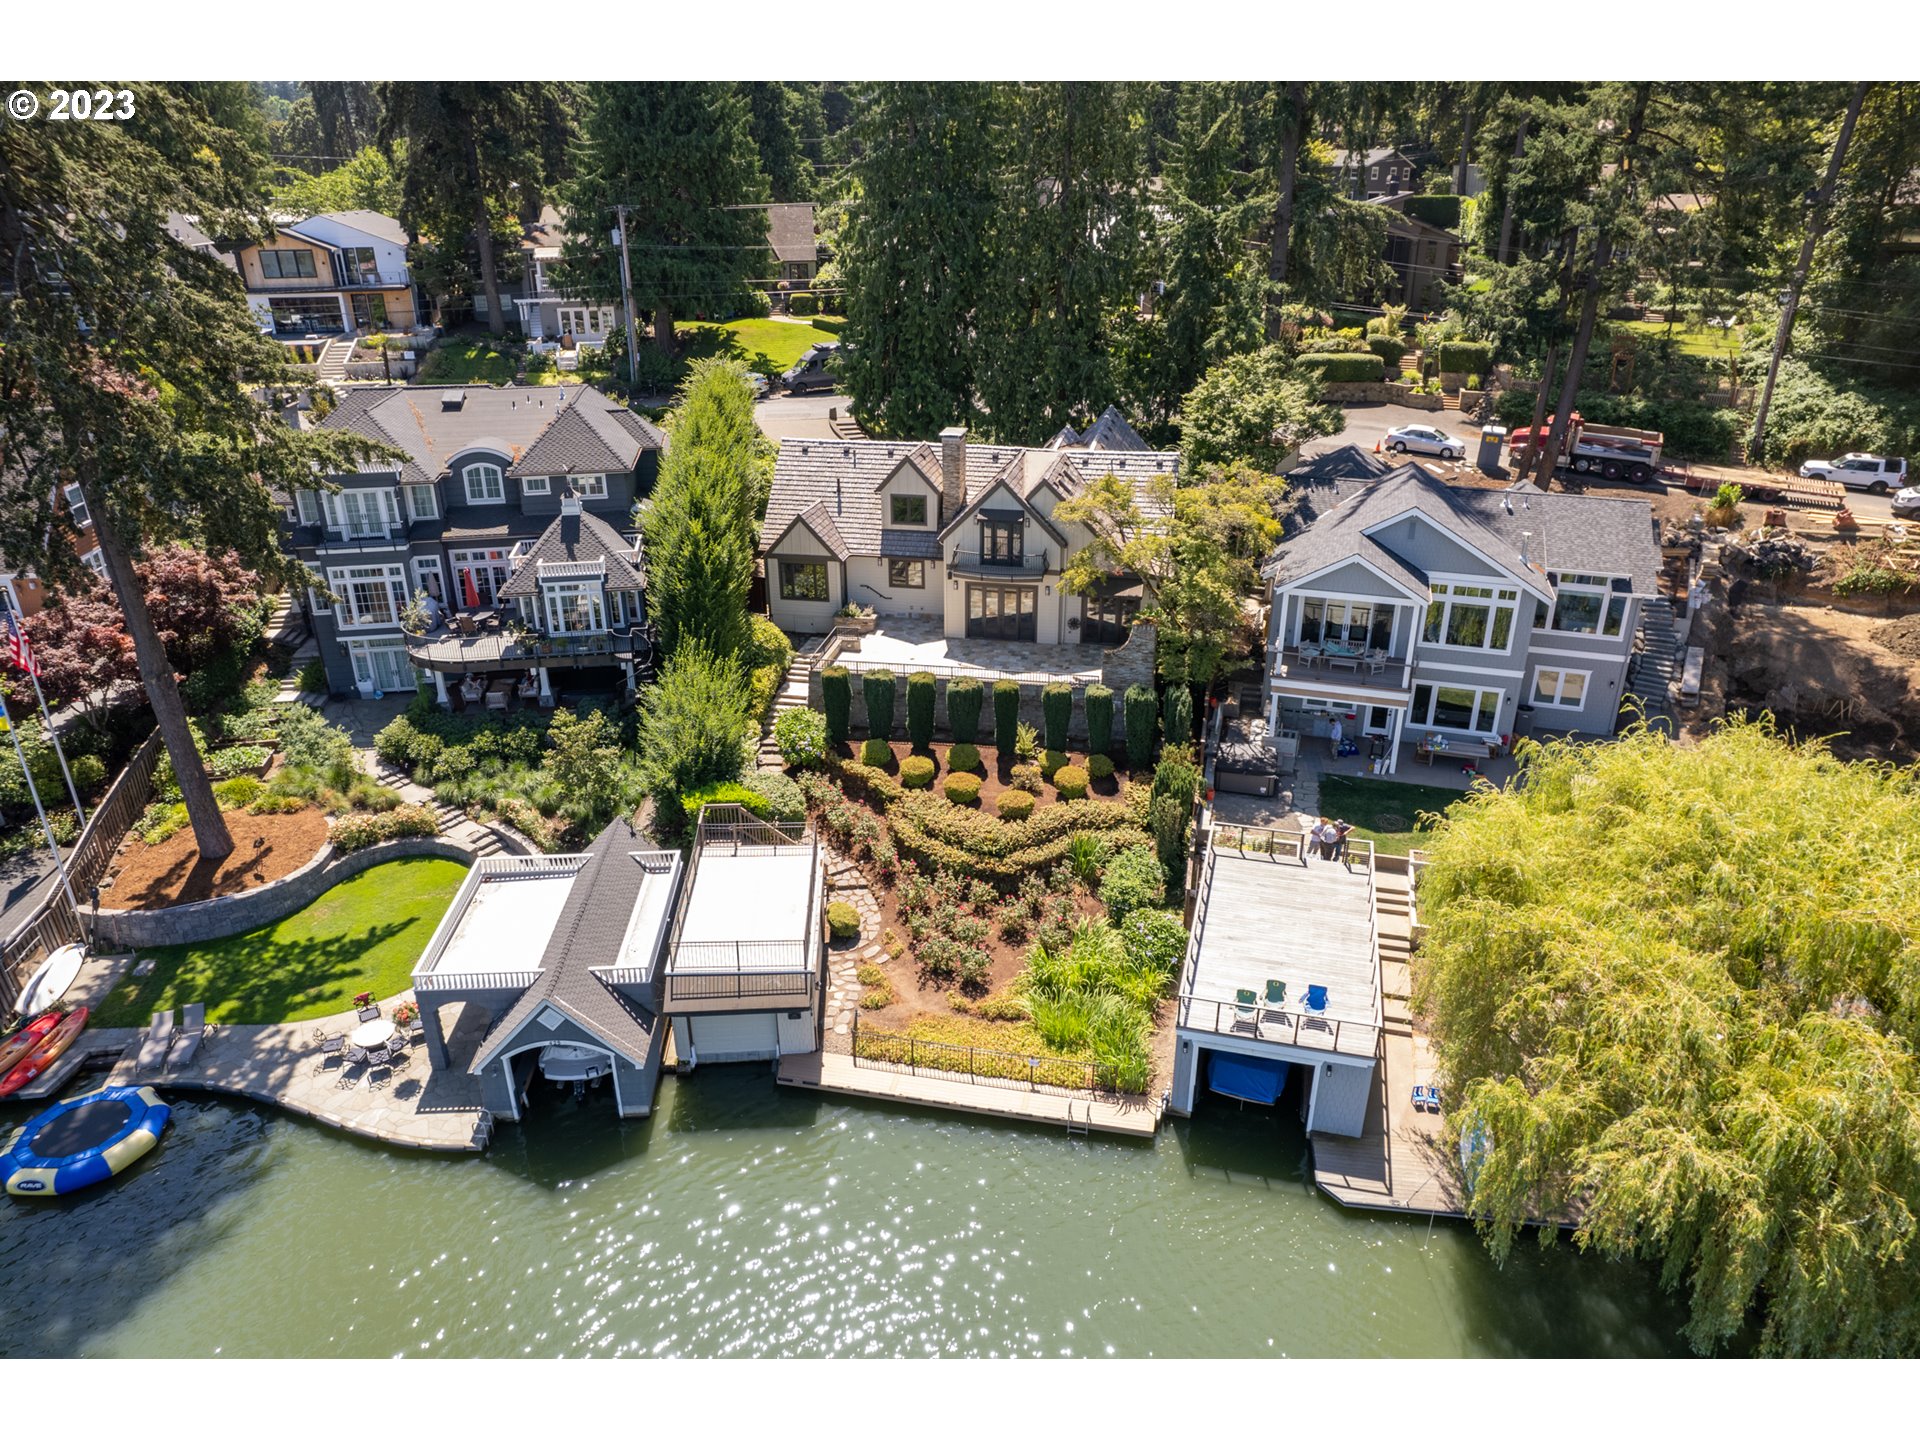 New Price! Elegant Lakefront home located on coveted Northshore Road in the heart of Lake Oswego. This waterfront home boasts of quality construction, main level living and water views from virtually every room. The layout features flexible a floorplan including three bedrooms with full baths and walk-in closets, a half bath and an office with walnut built-ins. The home includes an open great room, chef's kitchen with granite counters, high ceilings and hardwood floors. Relax and enjoy the tranquil water views or entertain from the expansive patio, dock or rooftop deck. This beautiful home is nestled in an incredible location - just blocks from the vibrant restaurants, shopping, farmers market, parks and activities that downtown Lake Oswego has to offer. Enjoy the incredible lake lifestyle where every day is a vacation! Welcome home!